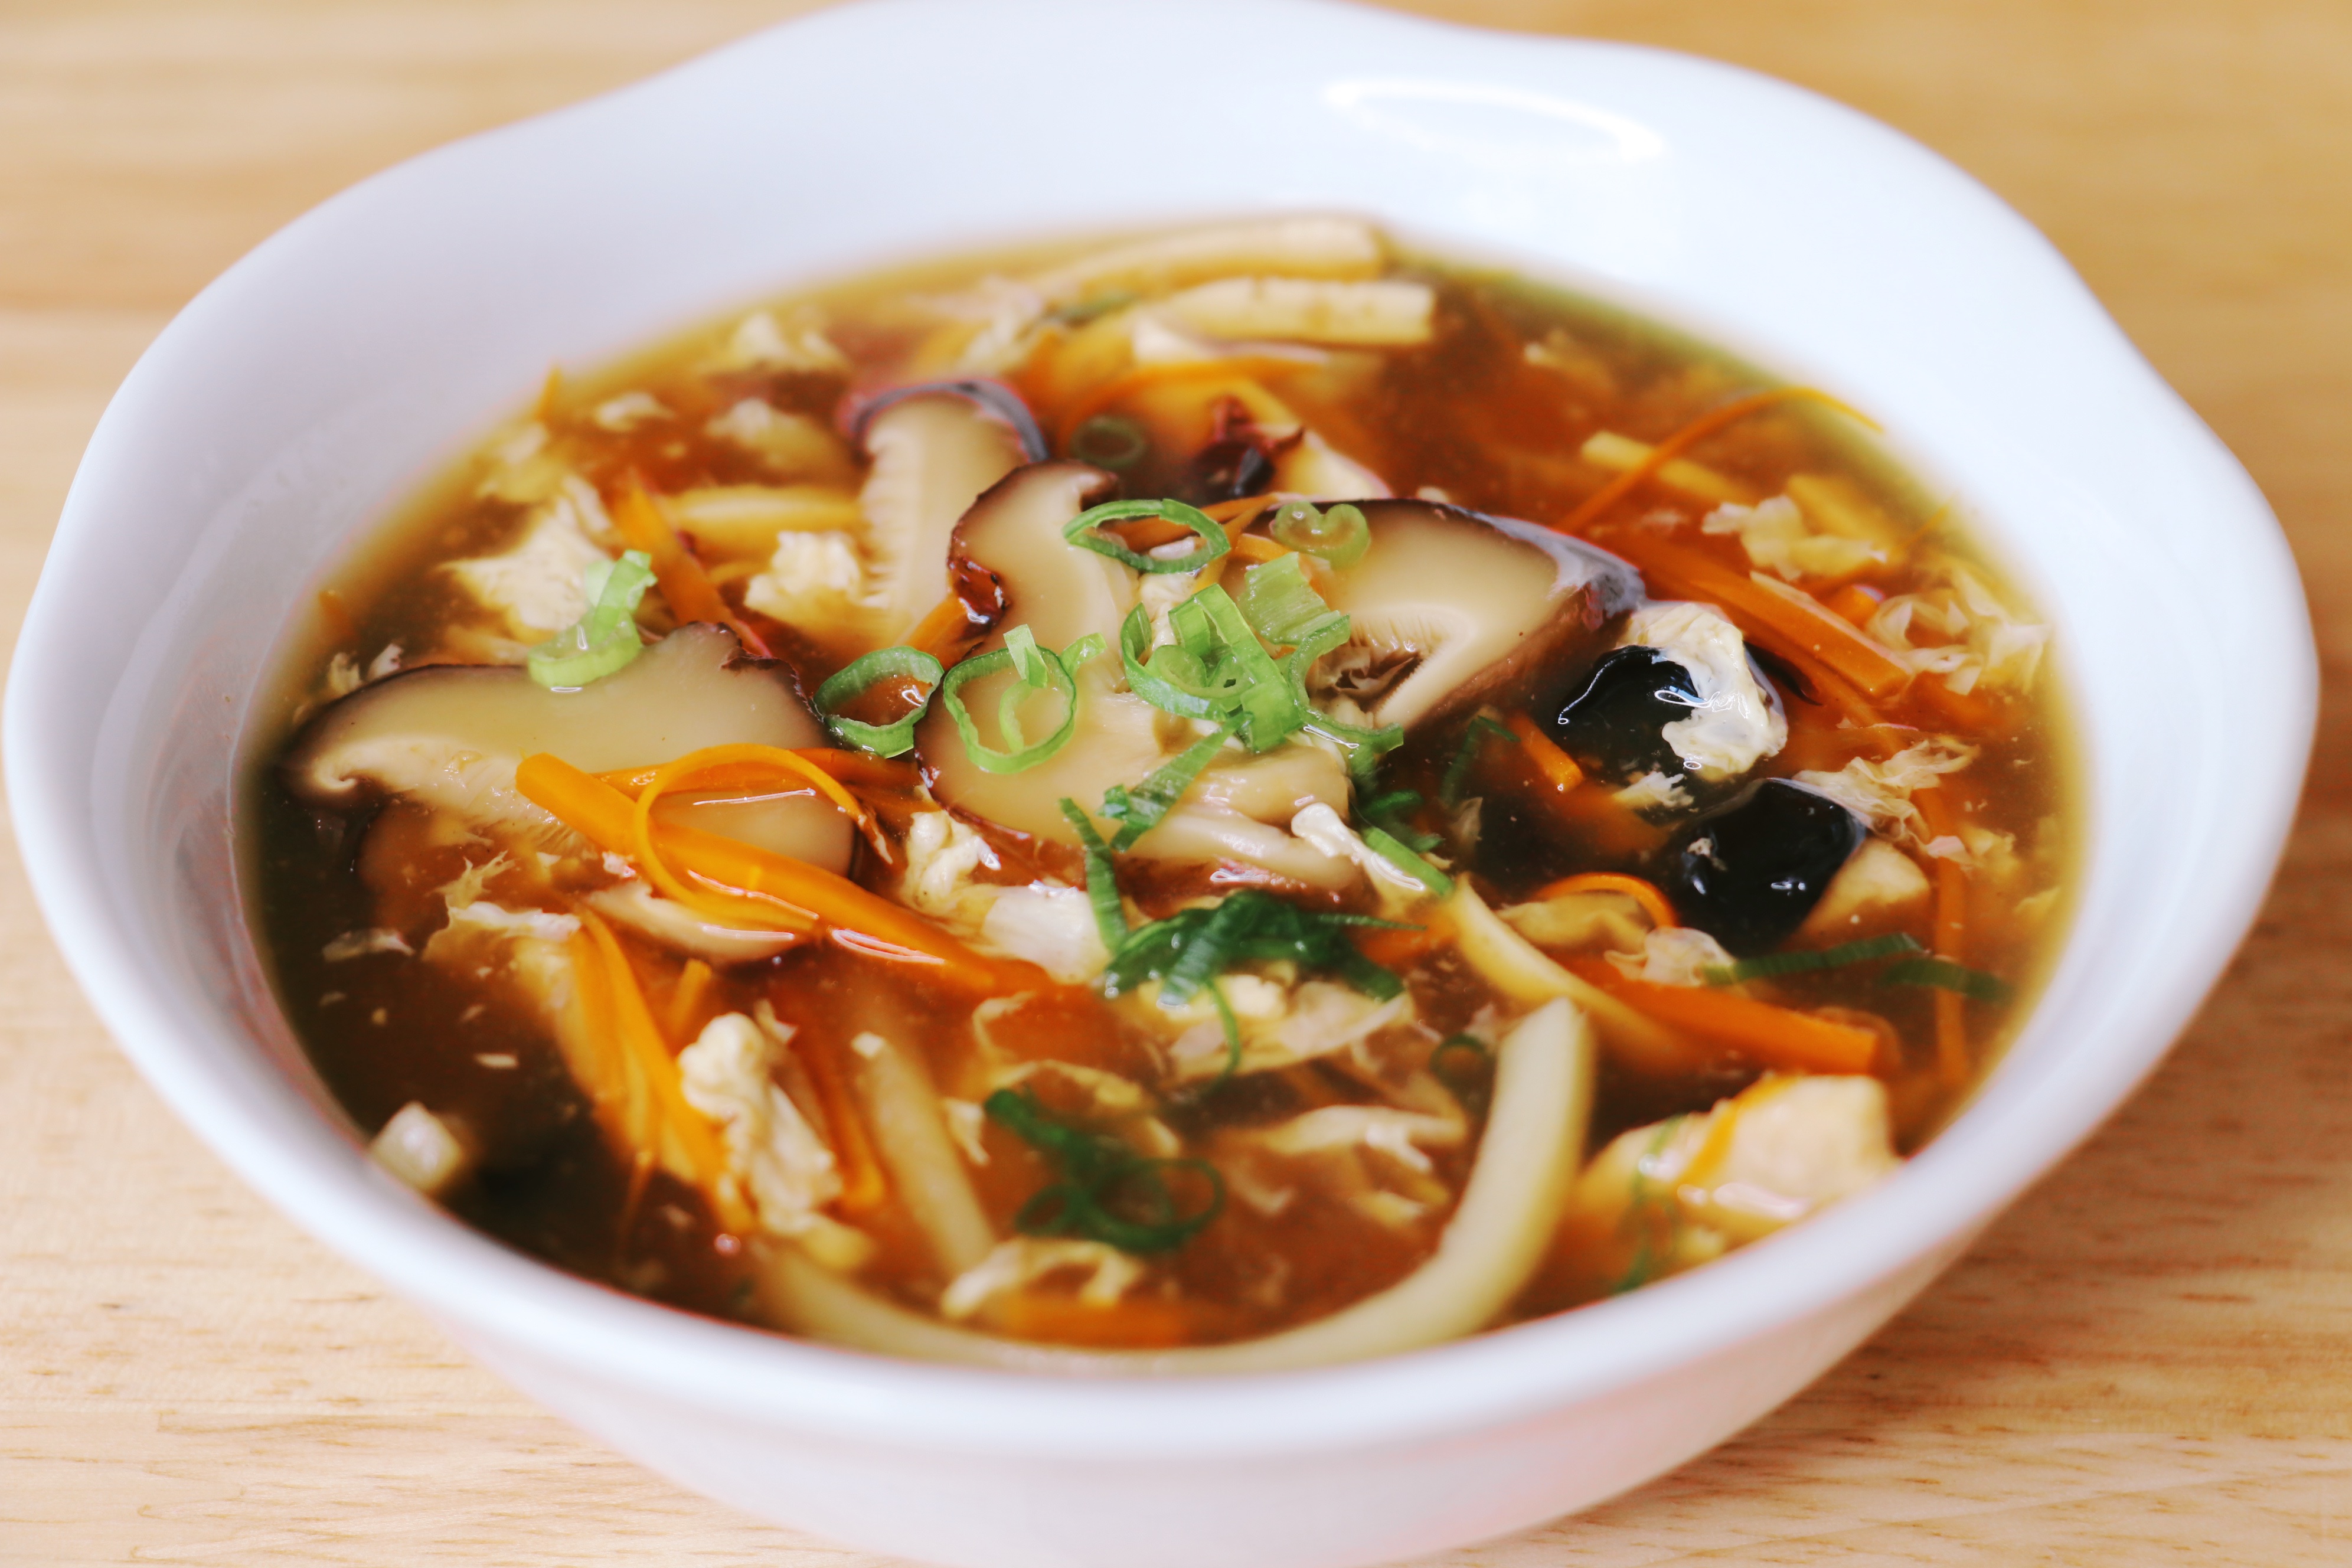 sweet and sour soup recipe